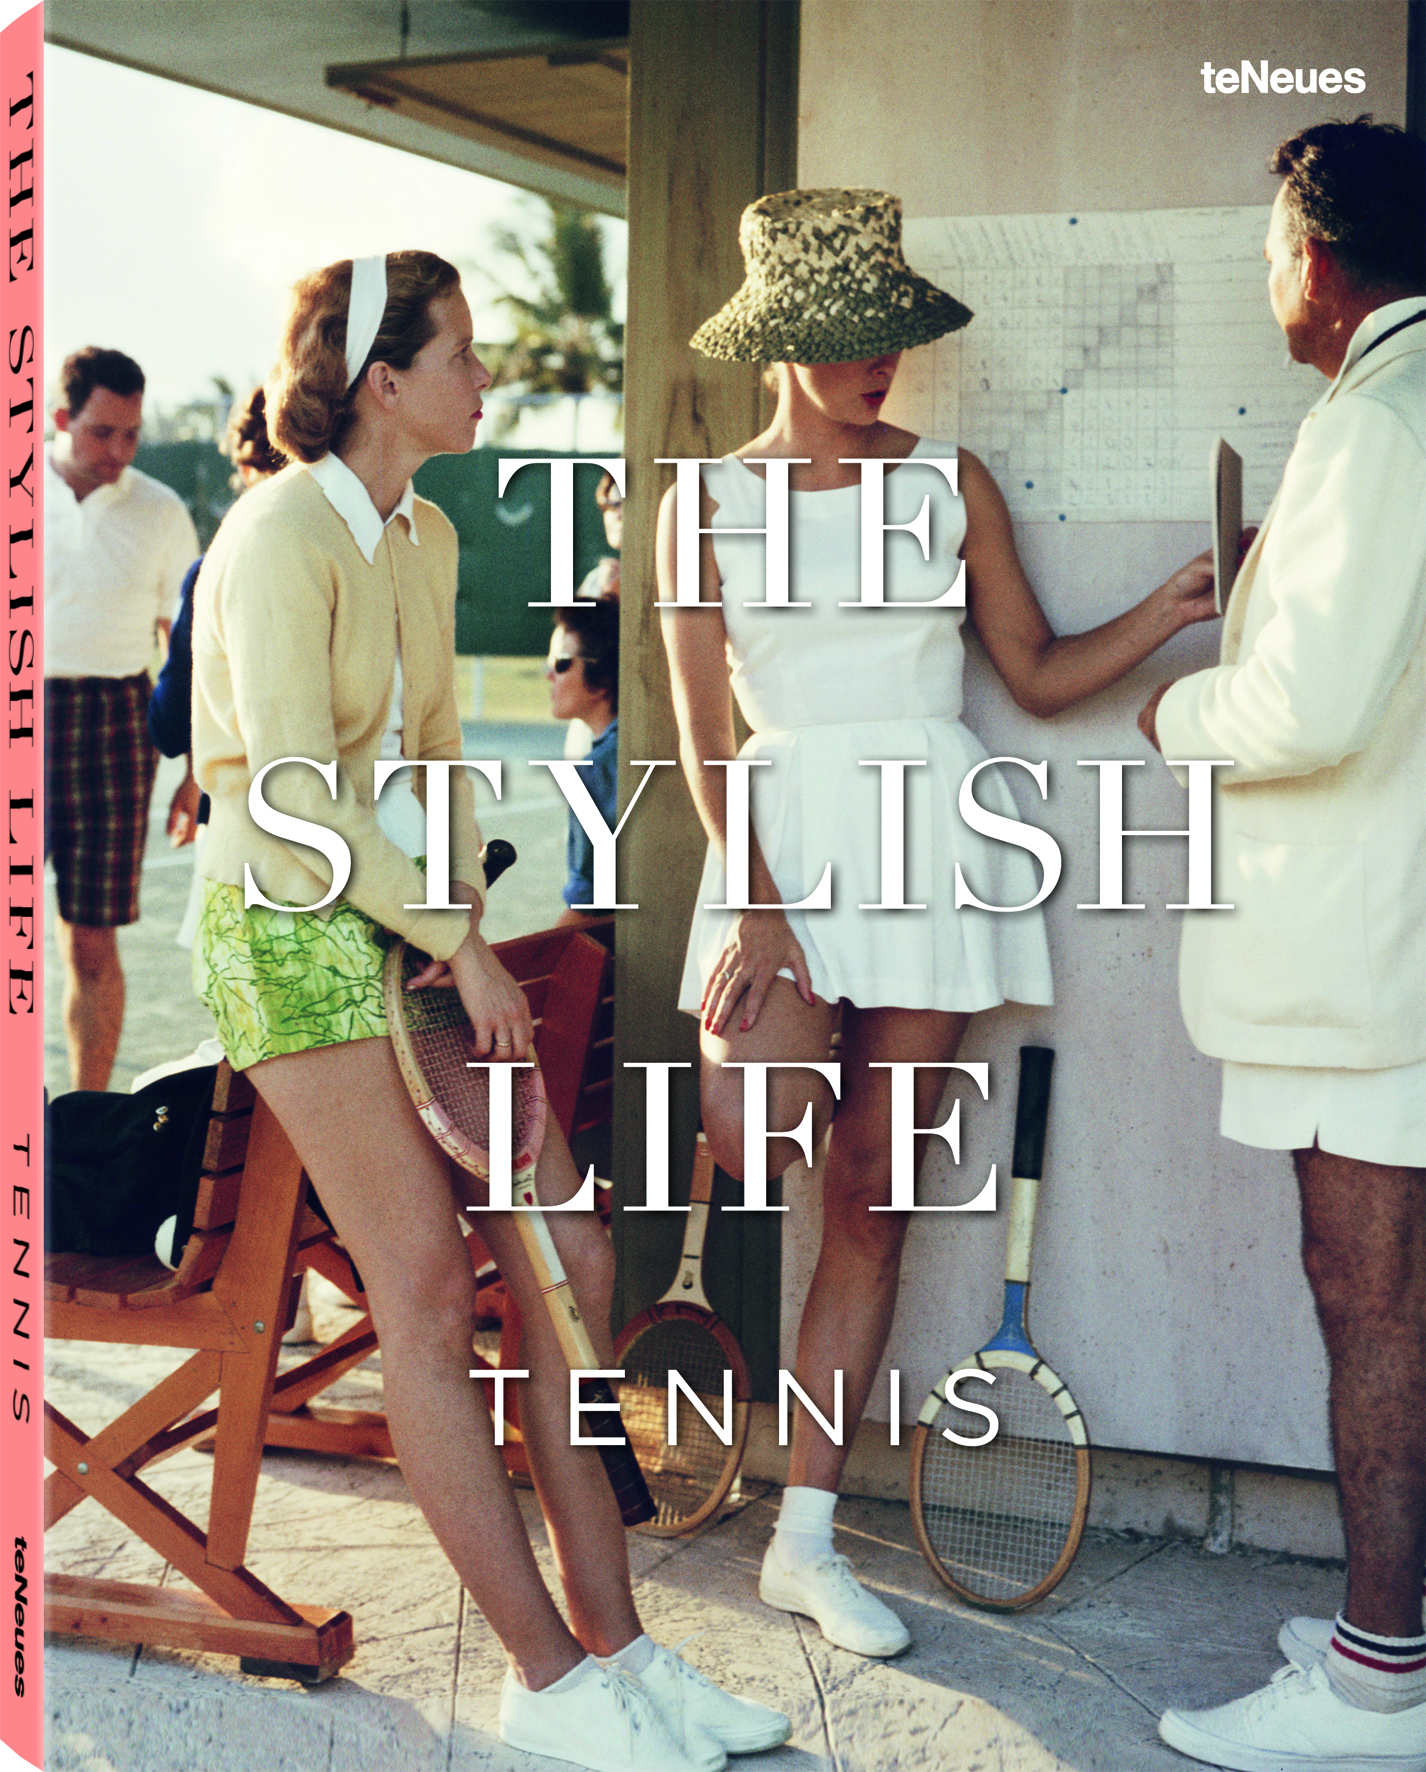   © The Stylish Life - Tennis, published by teNeues, www.teneues.com. Photo © Slim Aarons/Getty Images.  